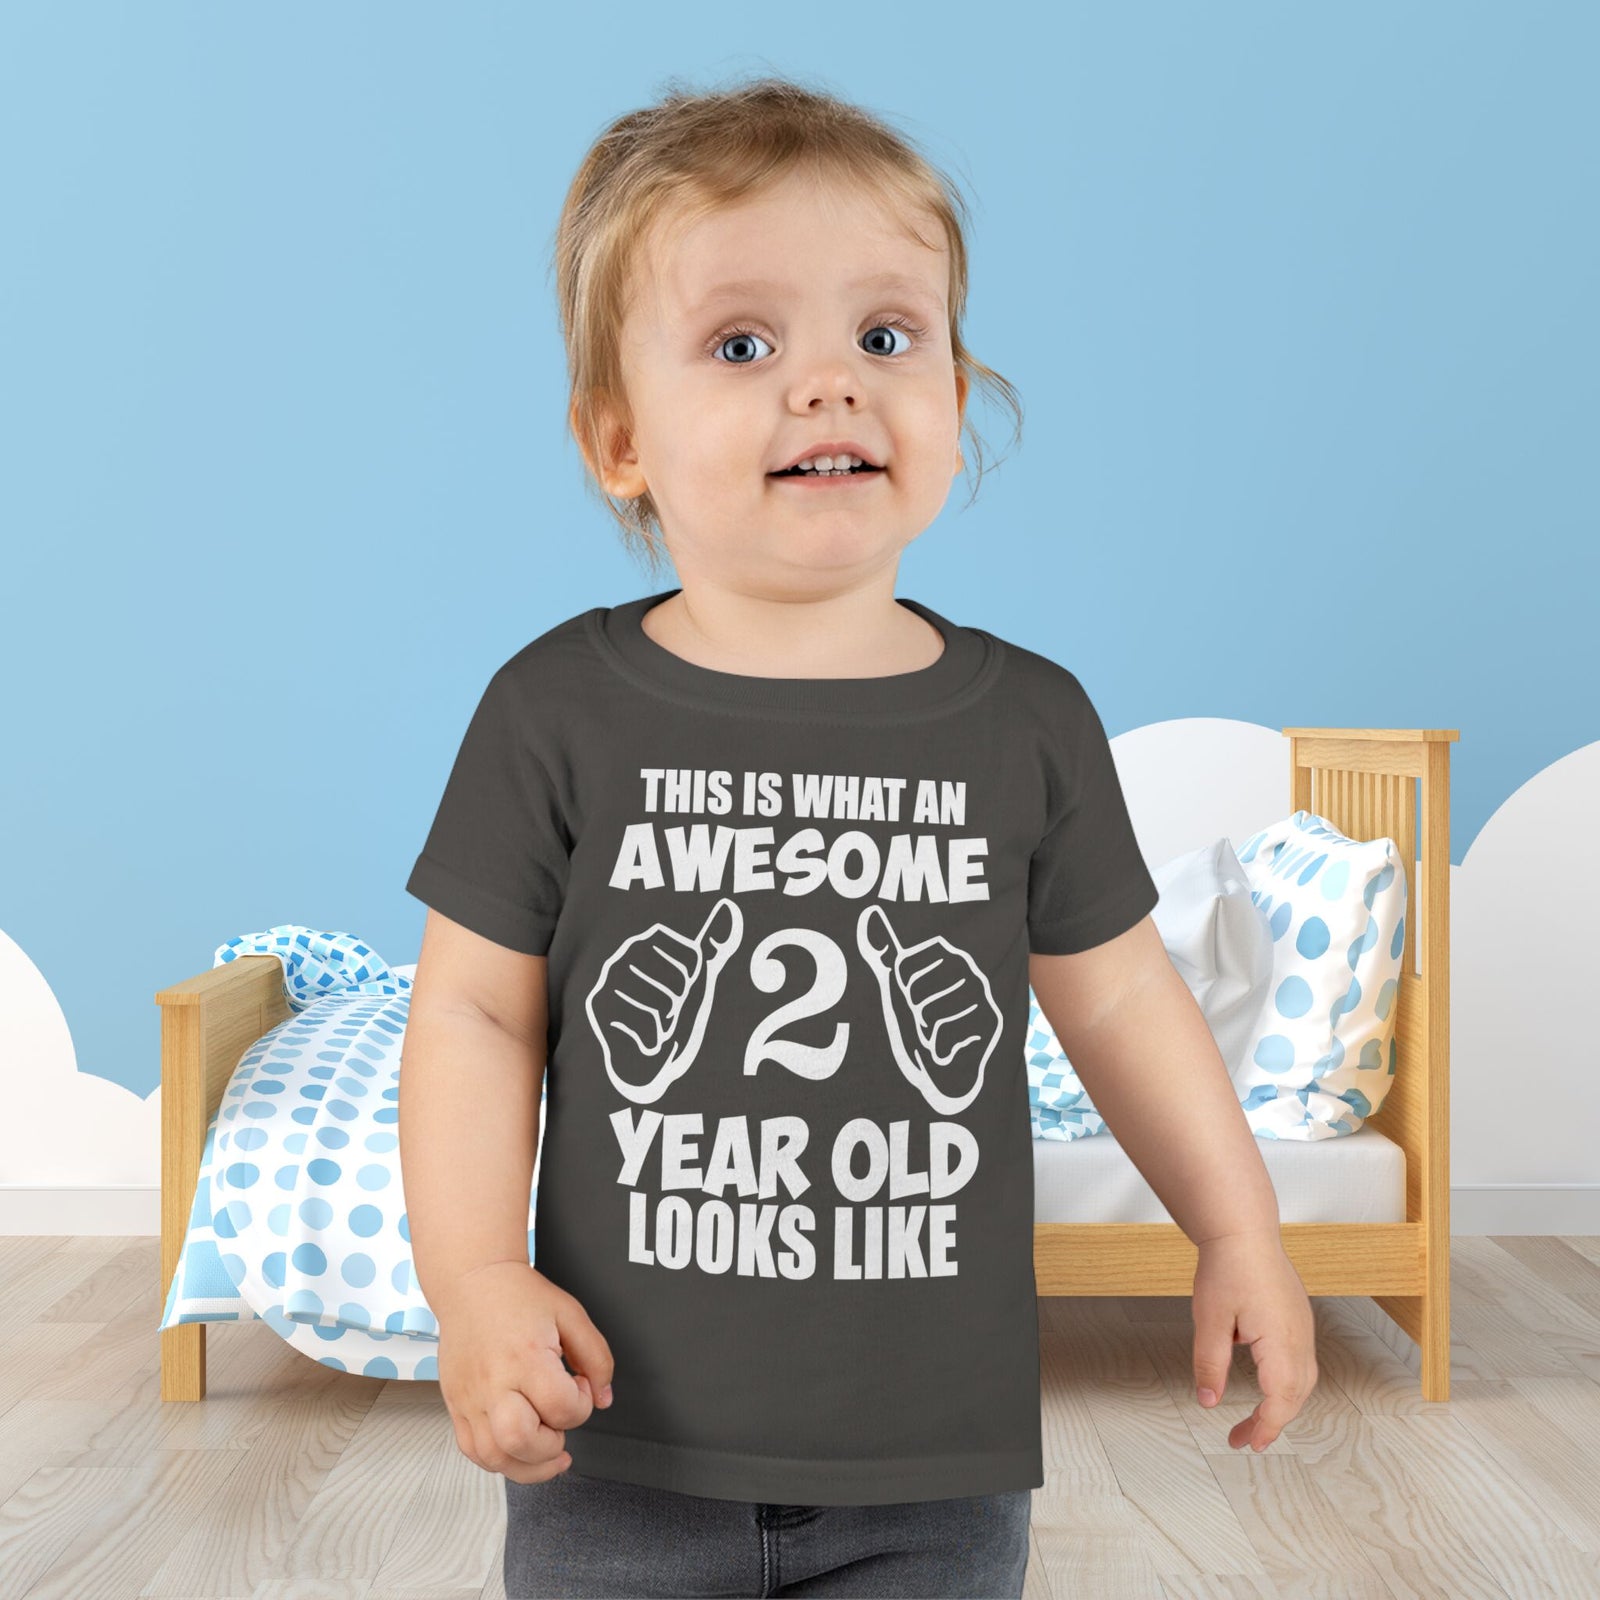 Adorable and Playful: Exploring Toddler Shirts for Every Little Personality